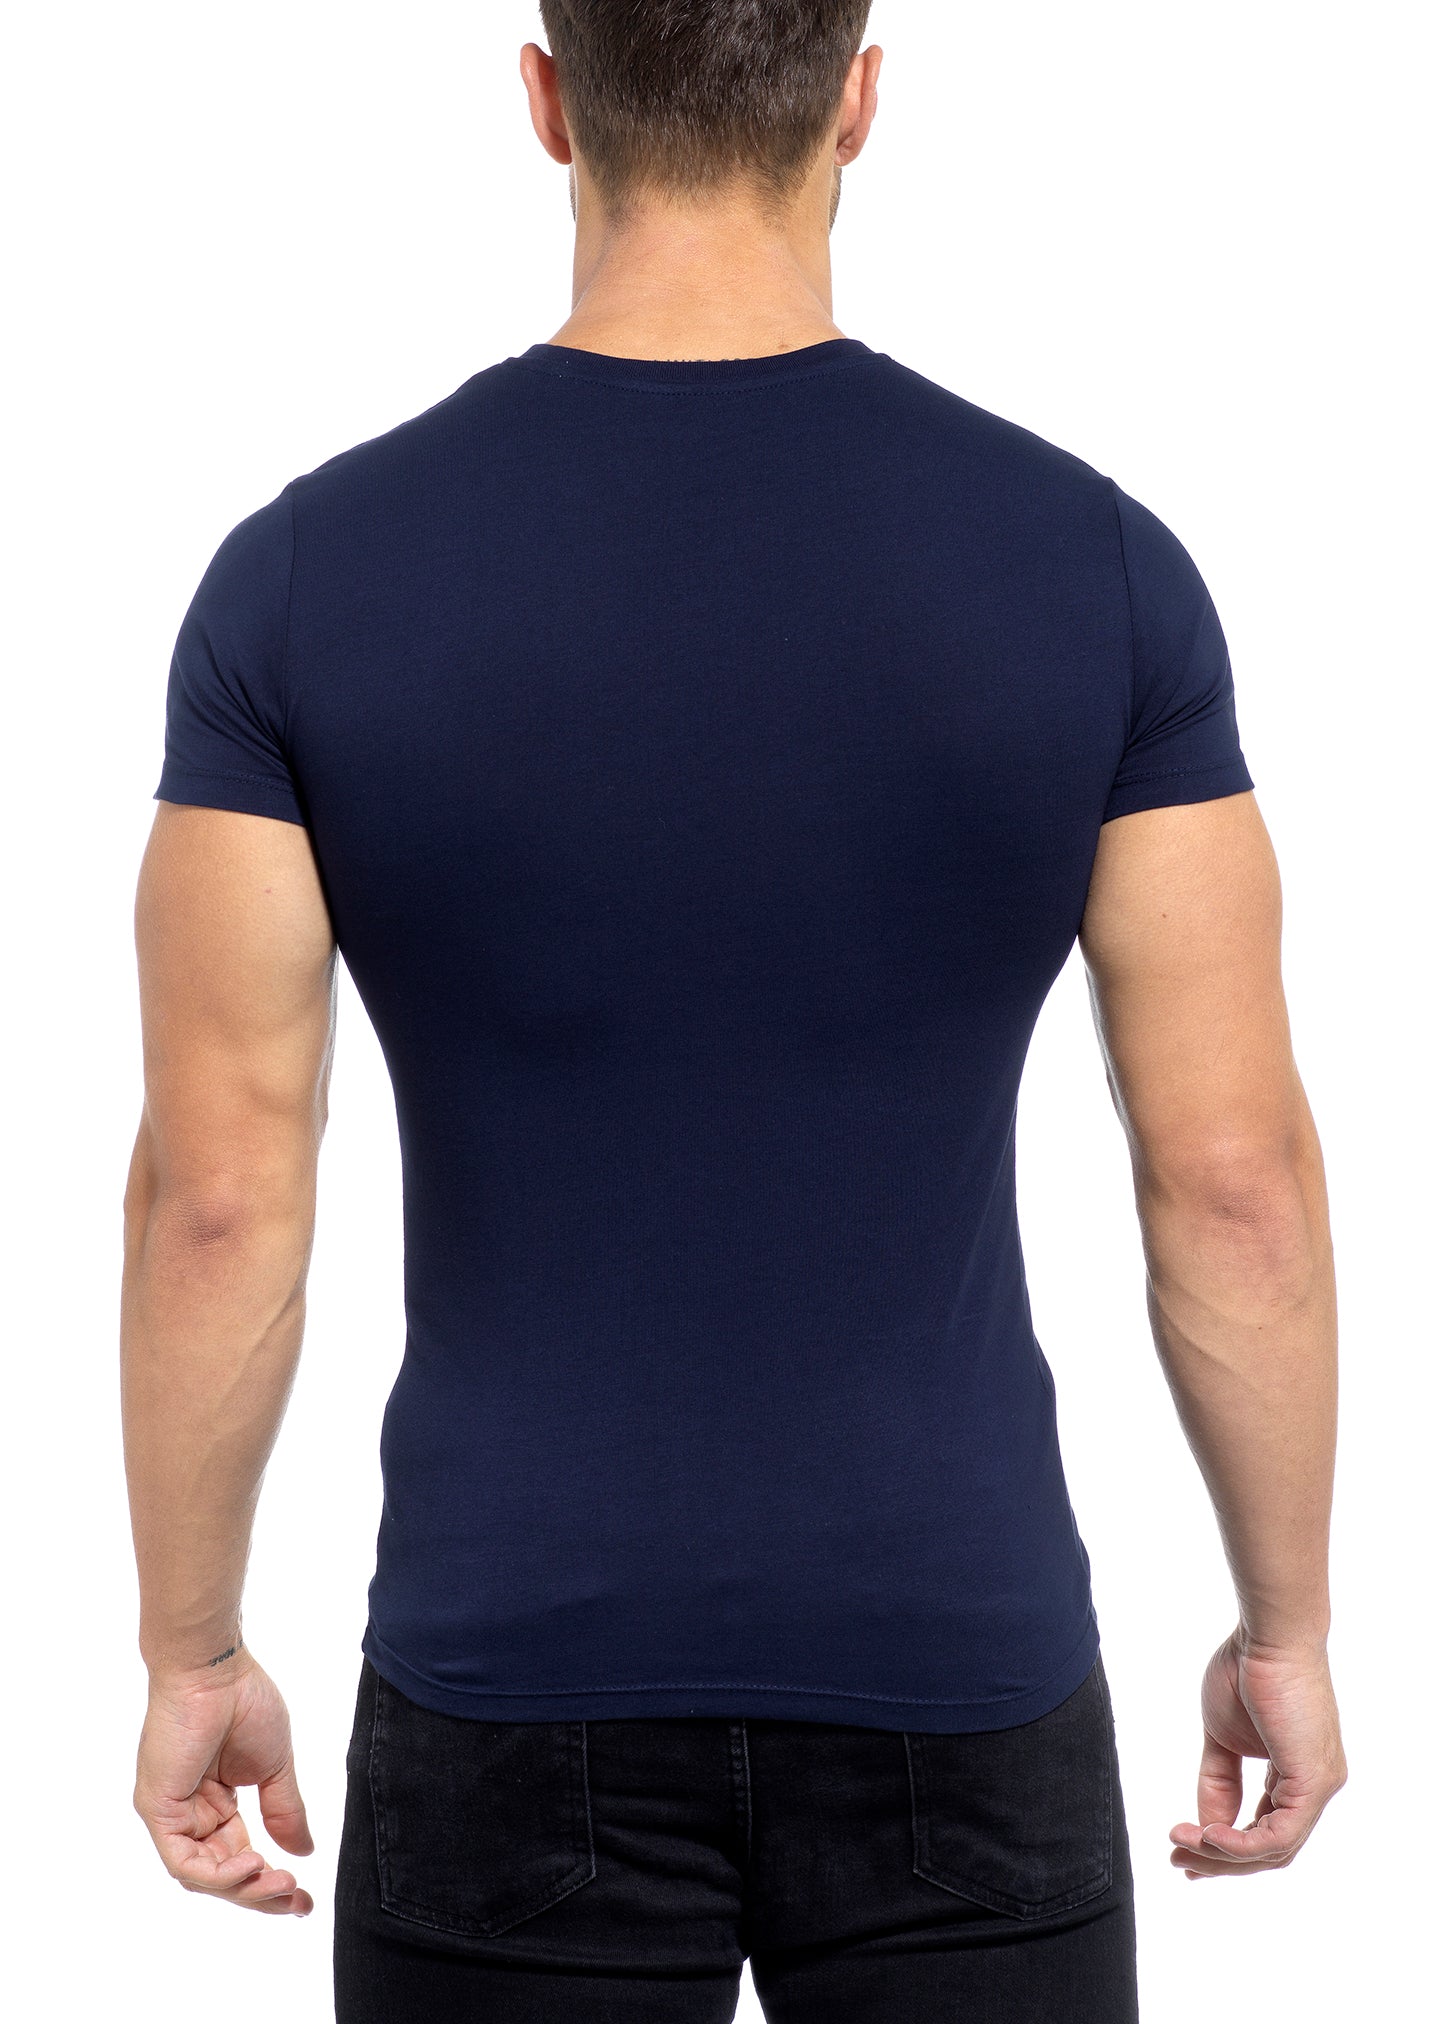 Mens Muscle Fit Navy Tops